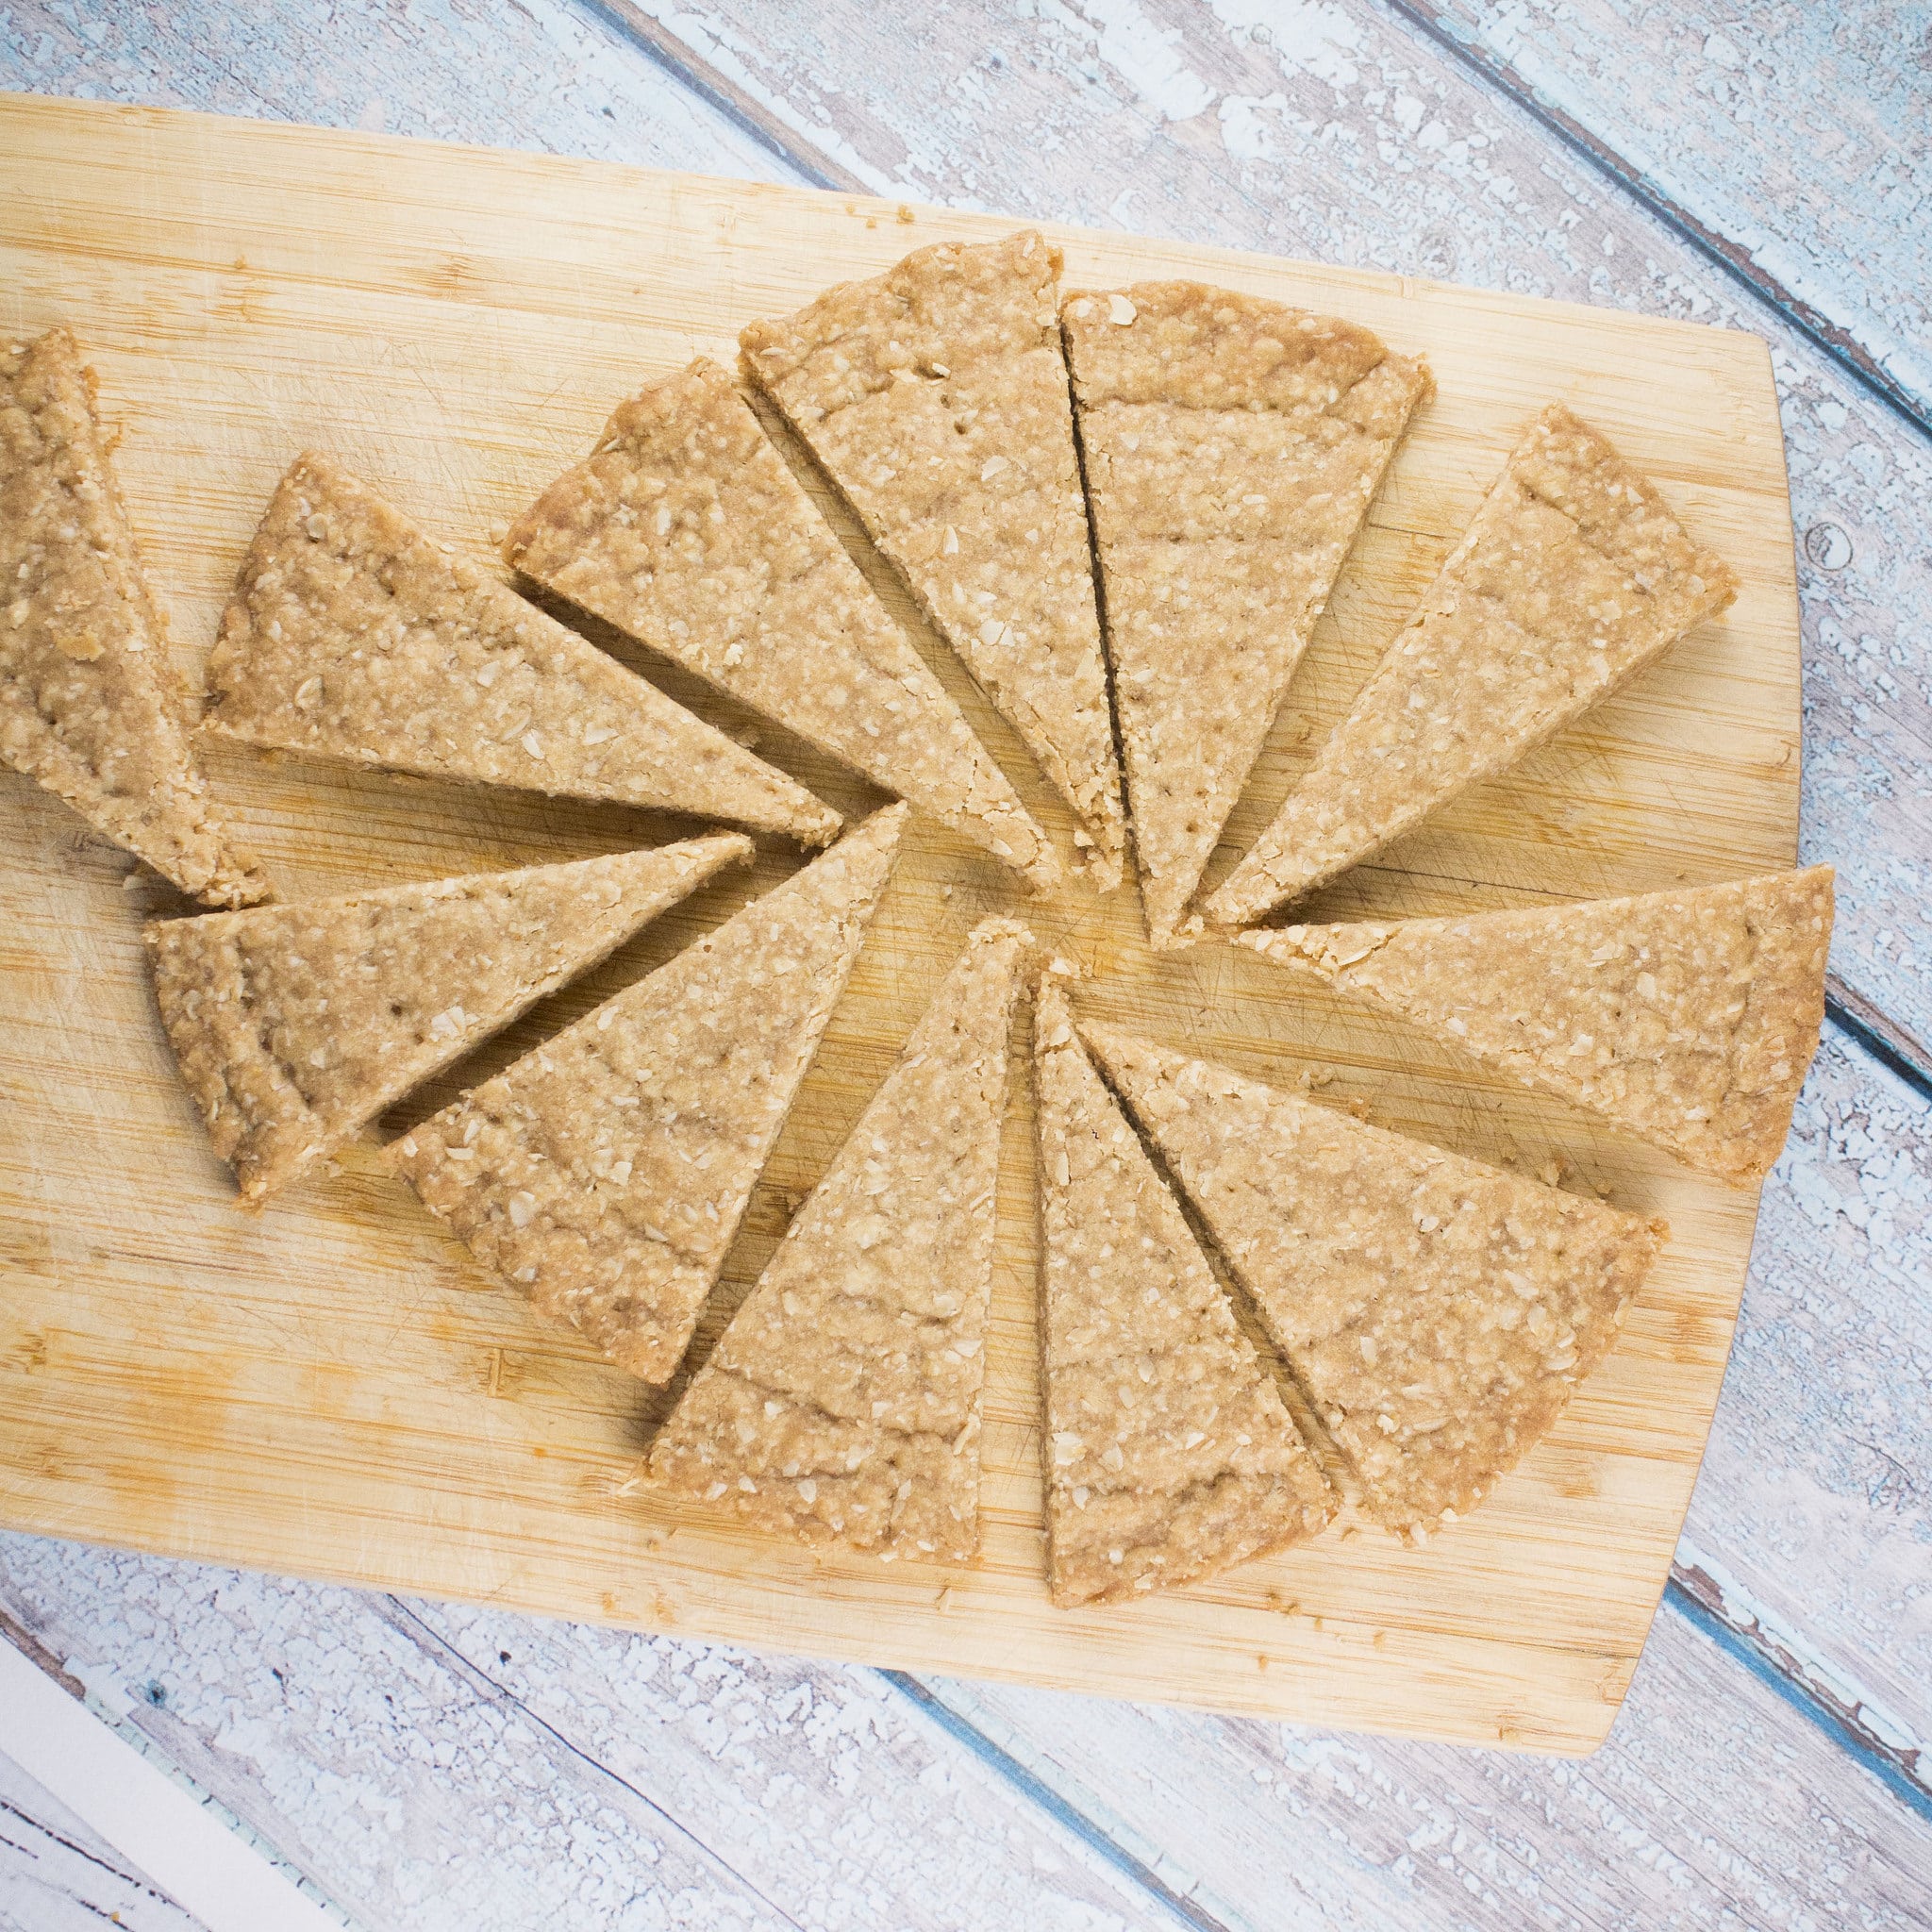 A Game of Thrones recipe for House Stark  - sweet oatcakes! Make this easy oat cake recipe while you're watching your favorite show!